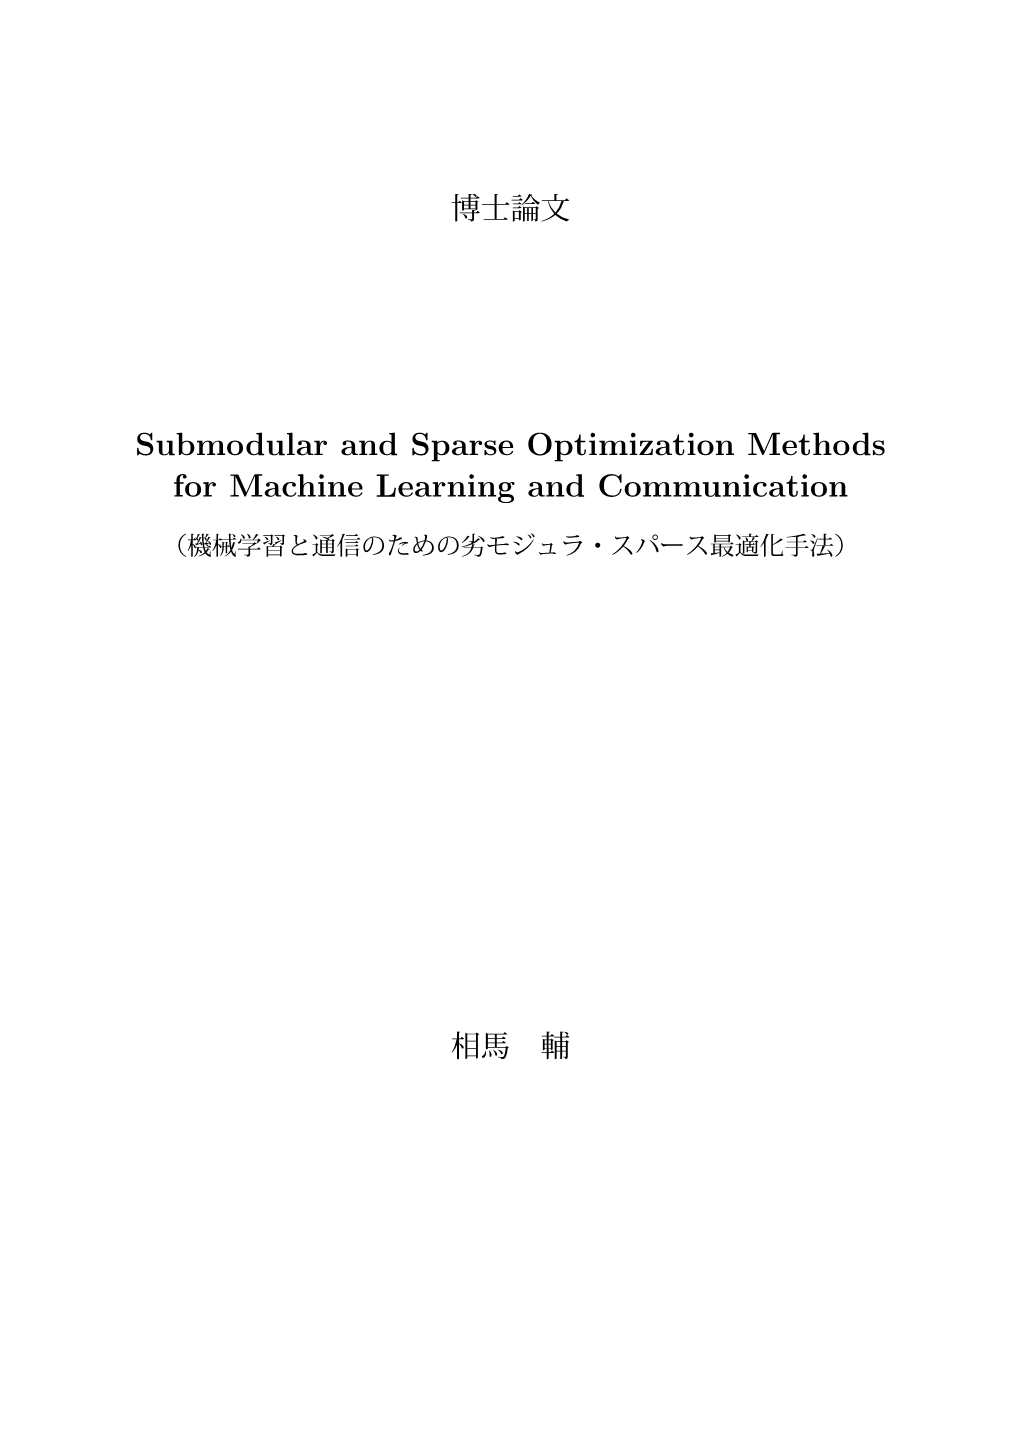 Submodular and Sparse Optimization Methods for Machine Learning and Communication